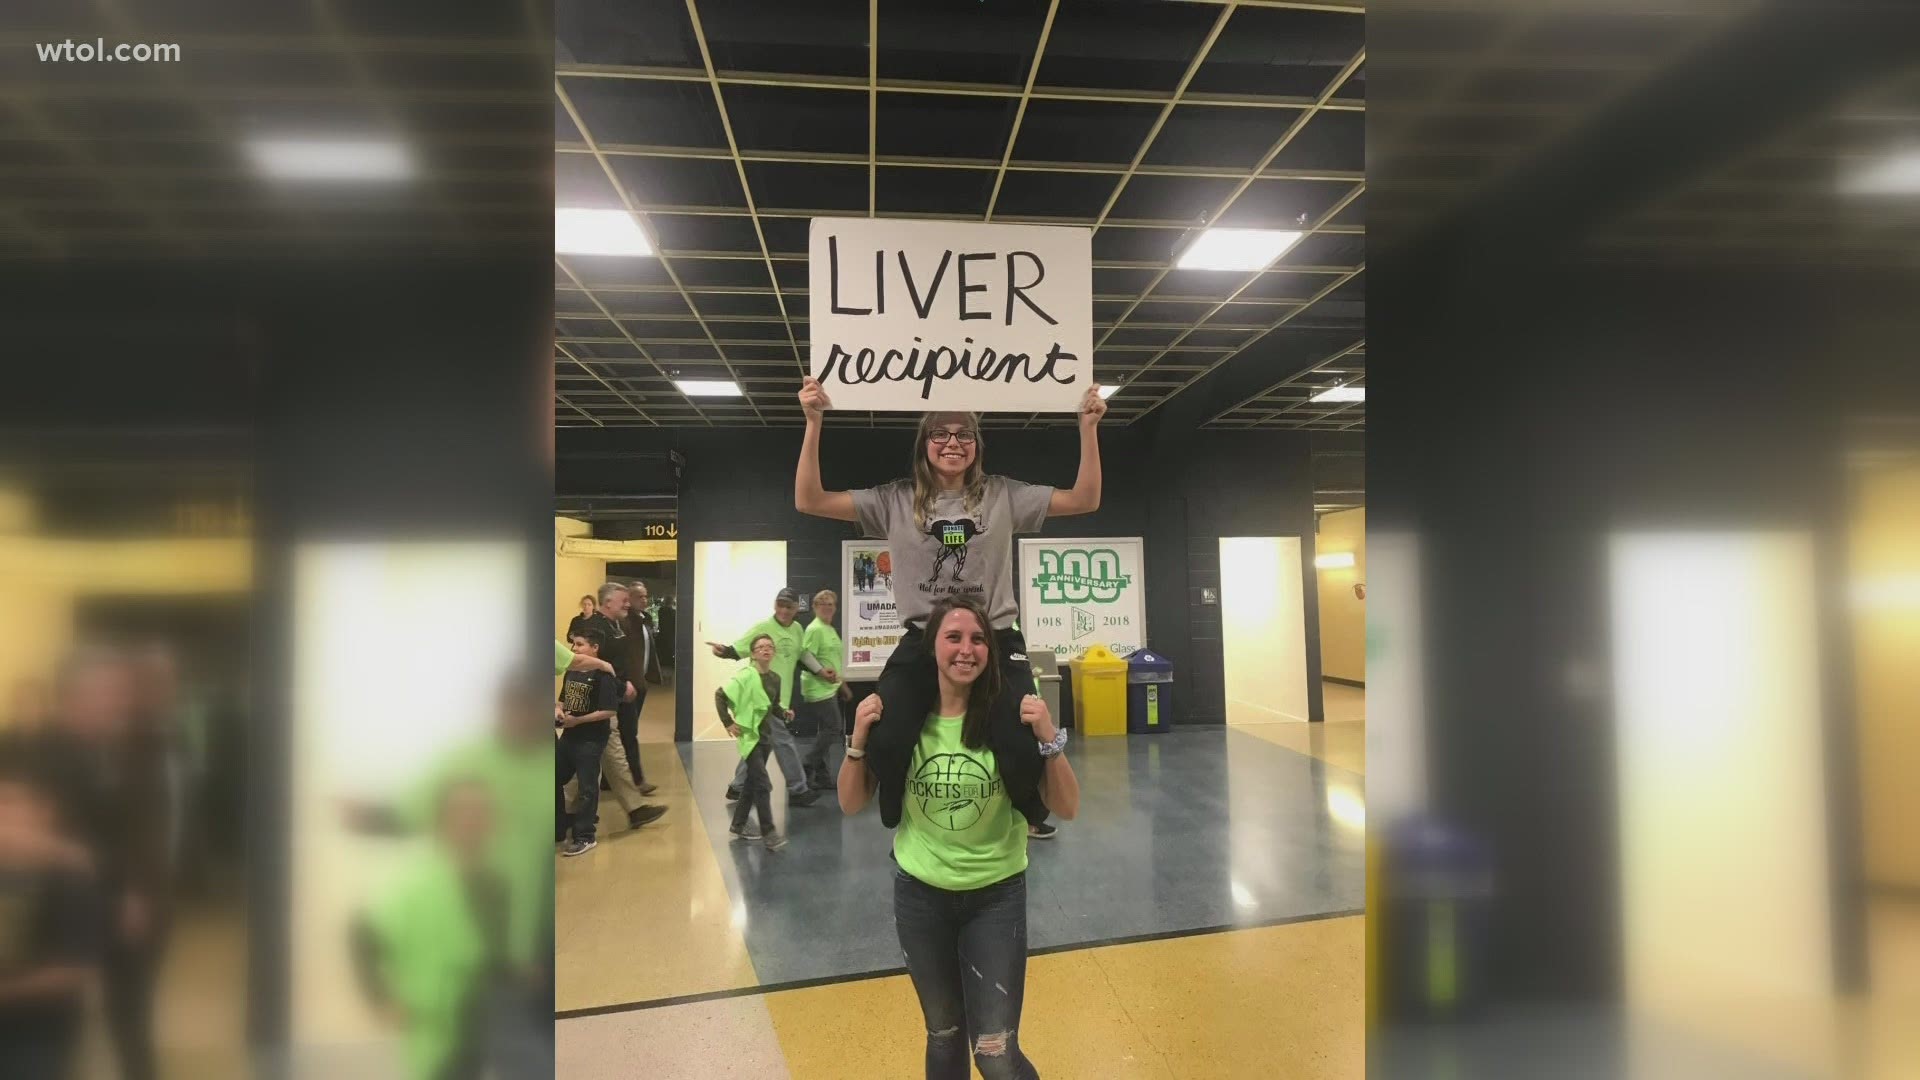 Allie Herr is alive, healthy and thriving today, all because of an organ donation she received when she was just 2 years old.